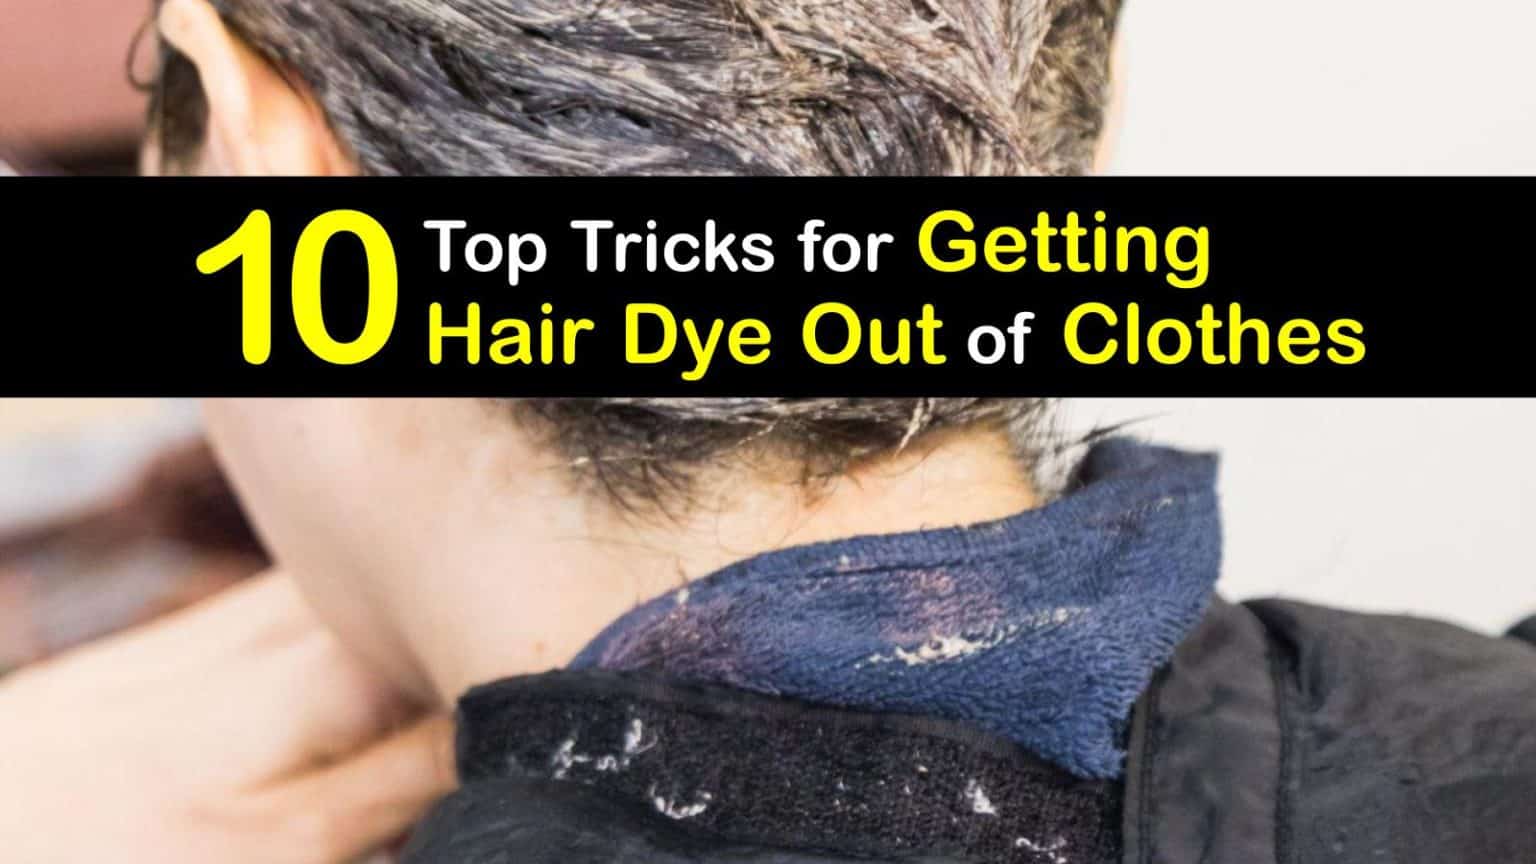 4. Tips for Removing Stubborn Bright Blue Hair Dye - wide 8